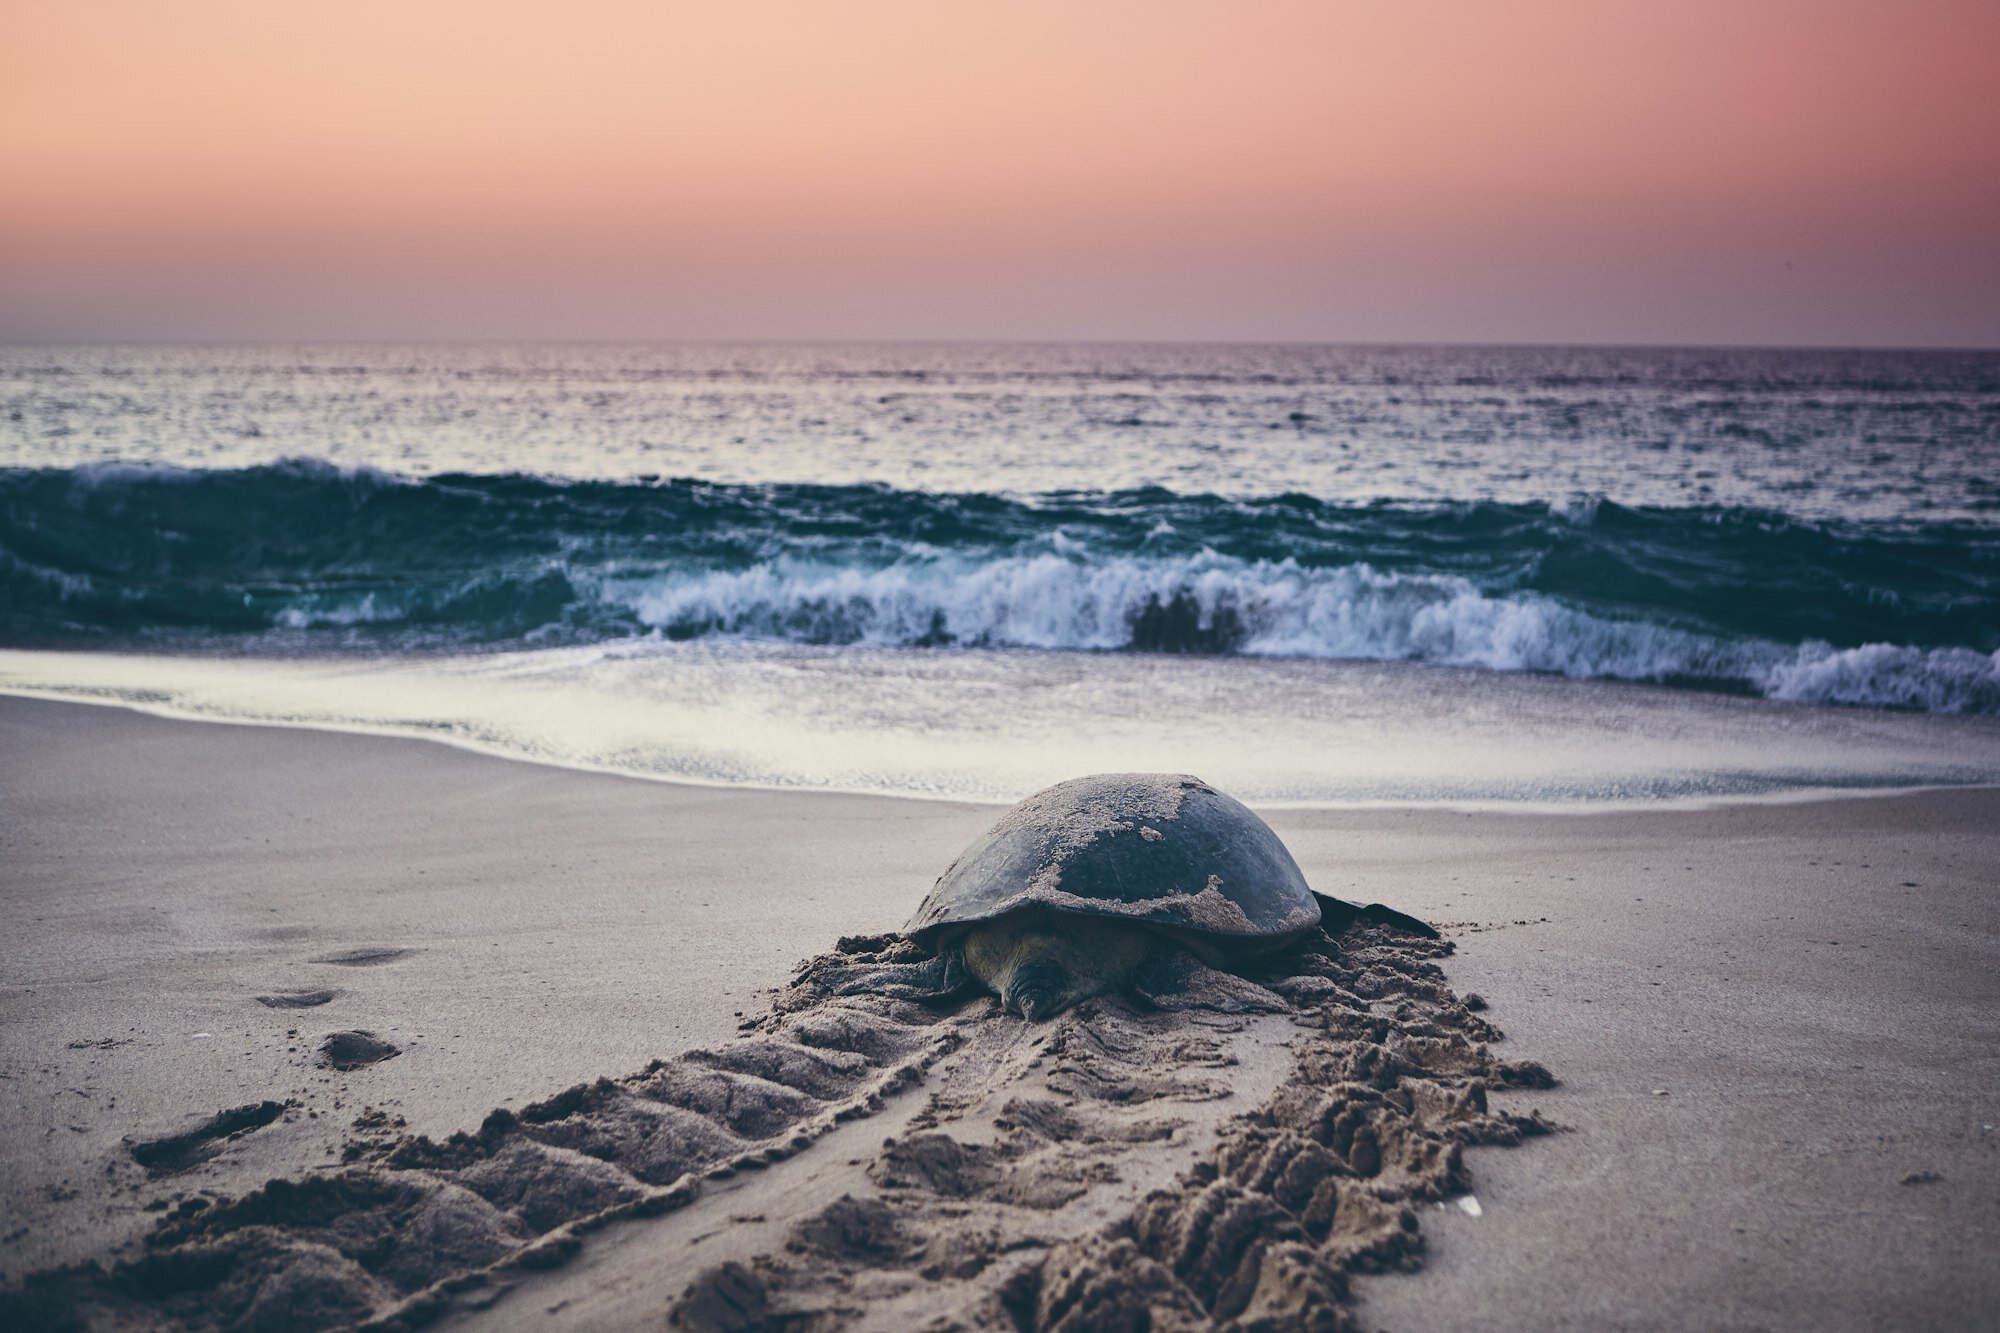 Huge green turtle heading back to ocean. Unique hatching place in Ras Al Jinz, Sultanate of Oman.